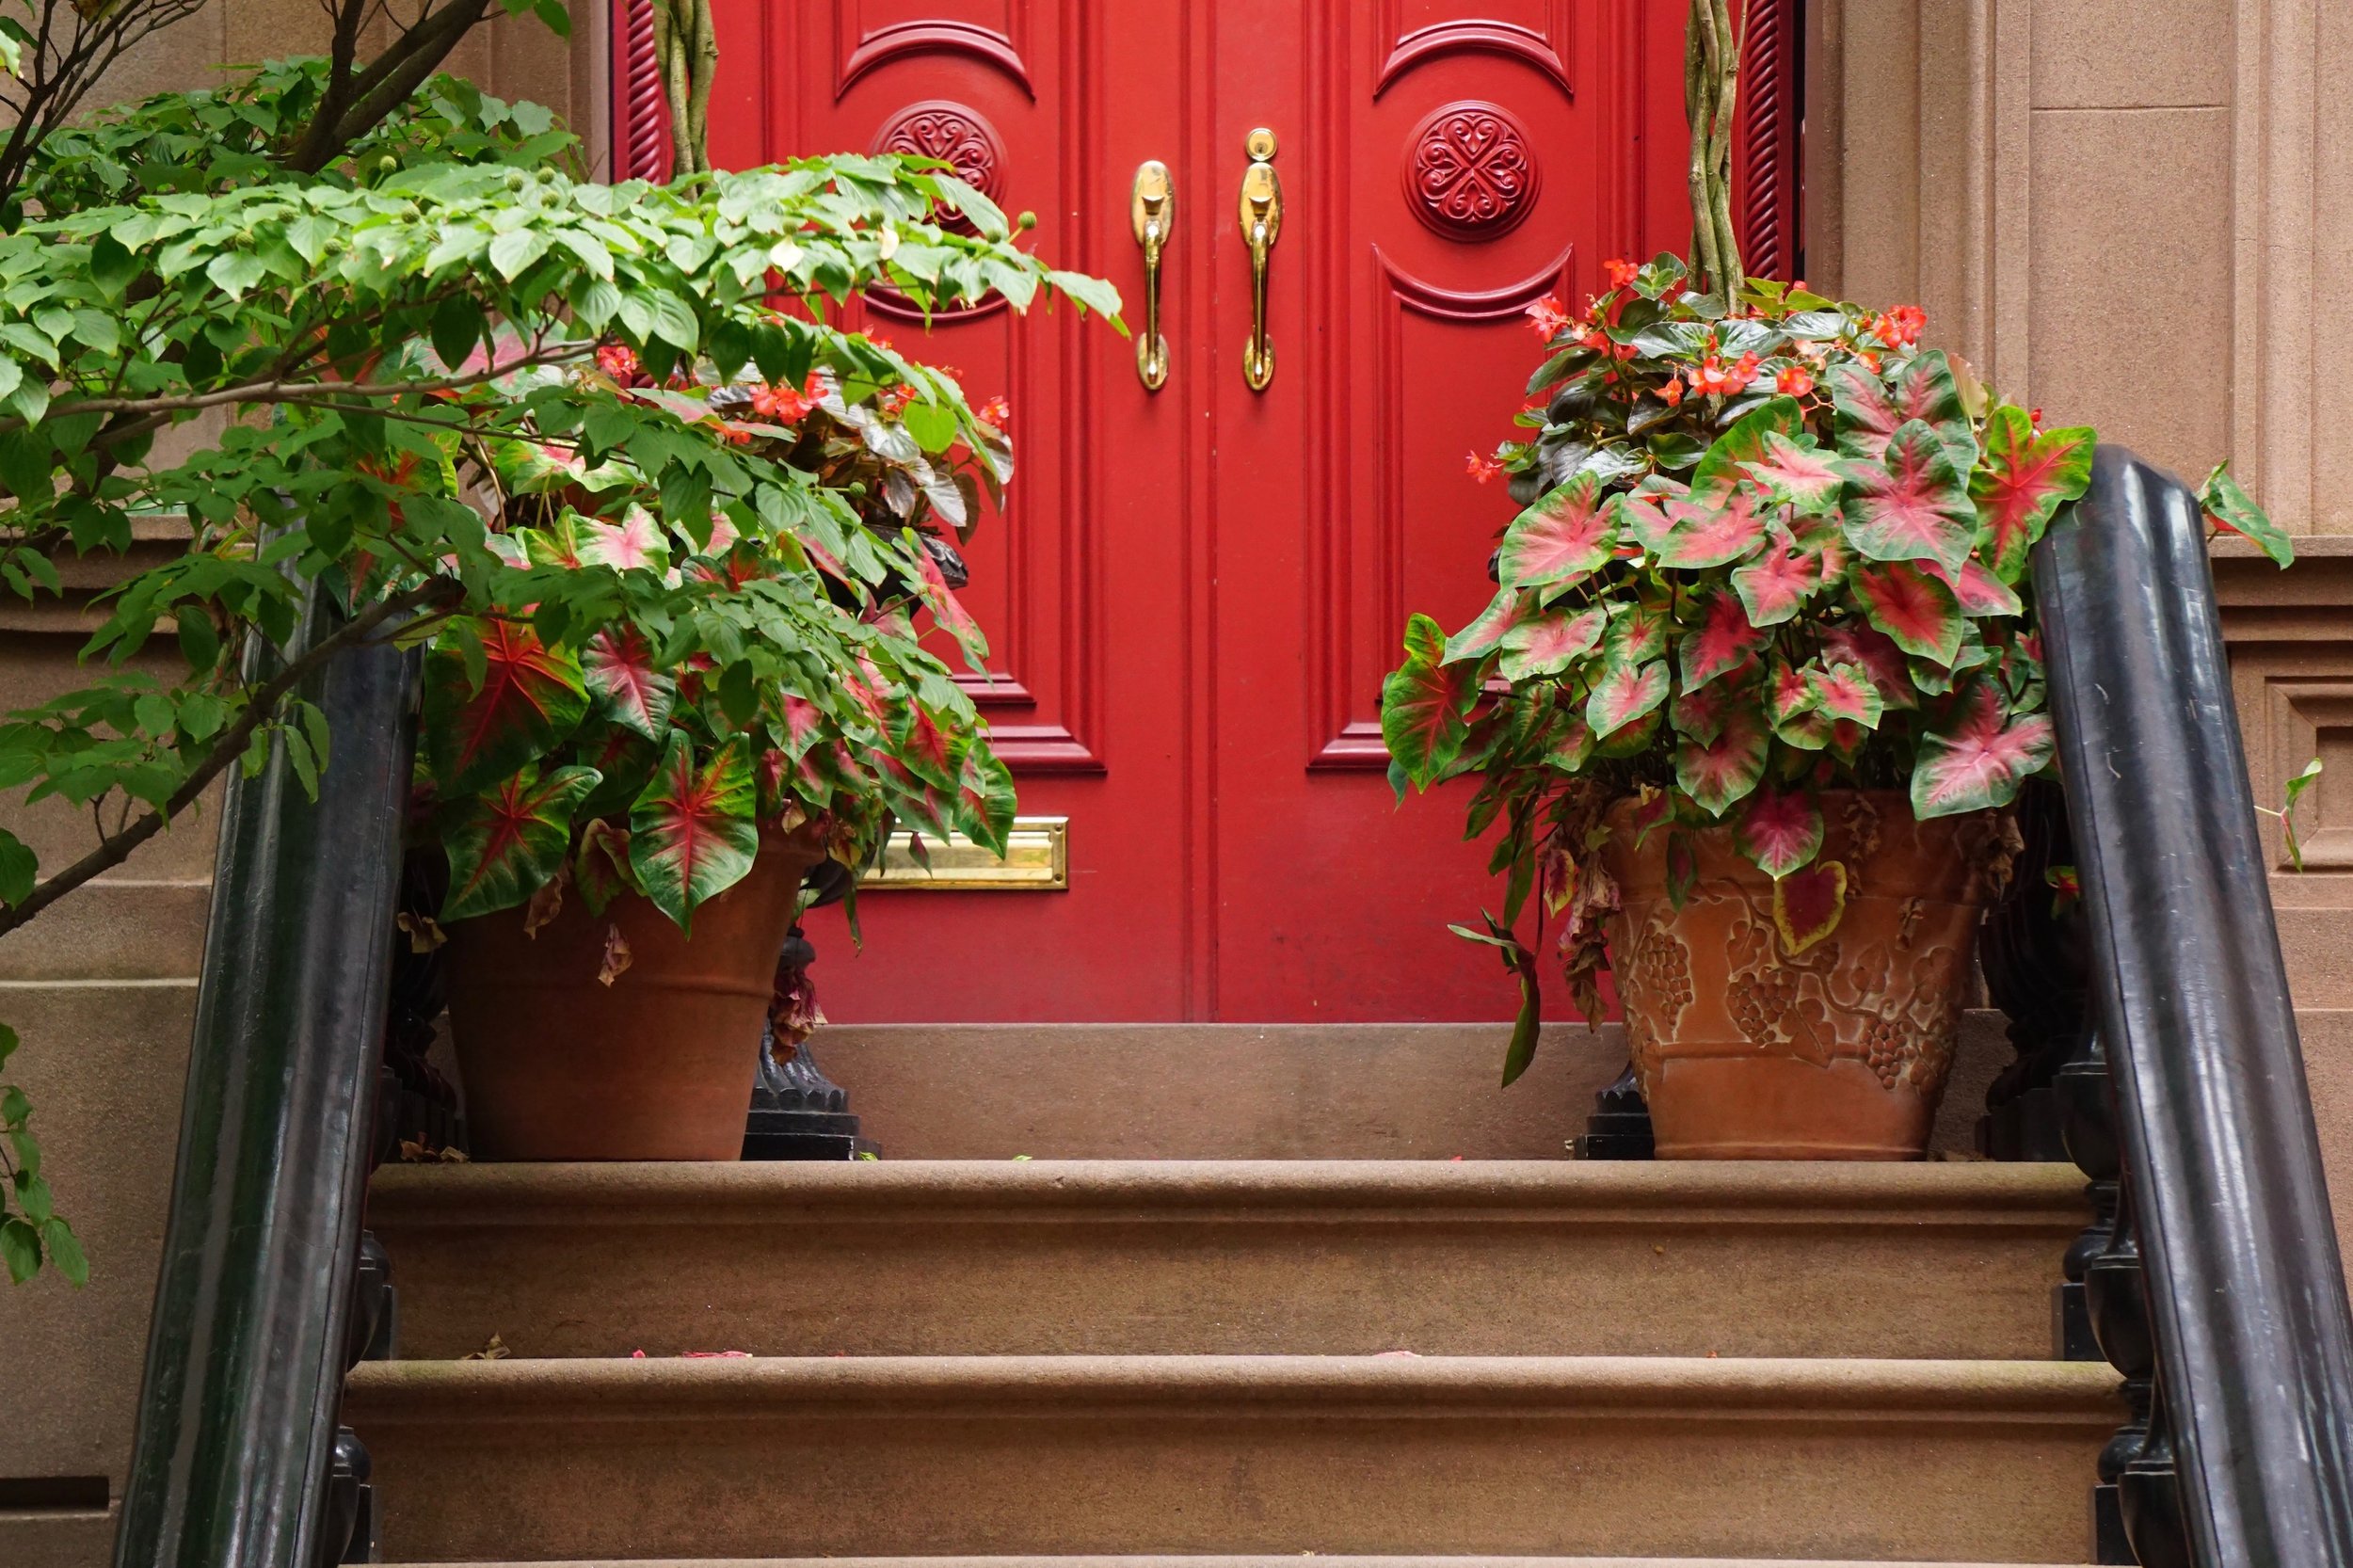 I see a red door in The West Village